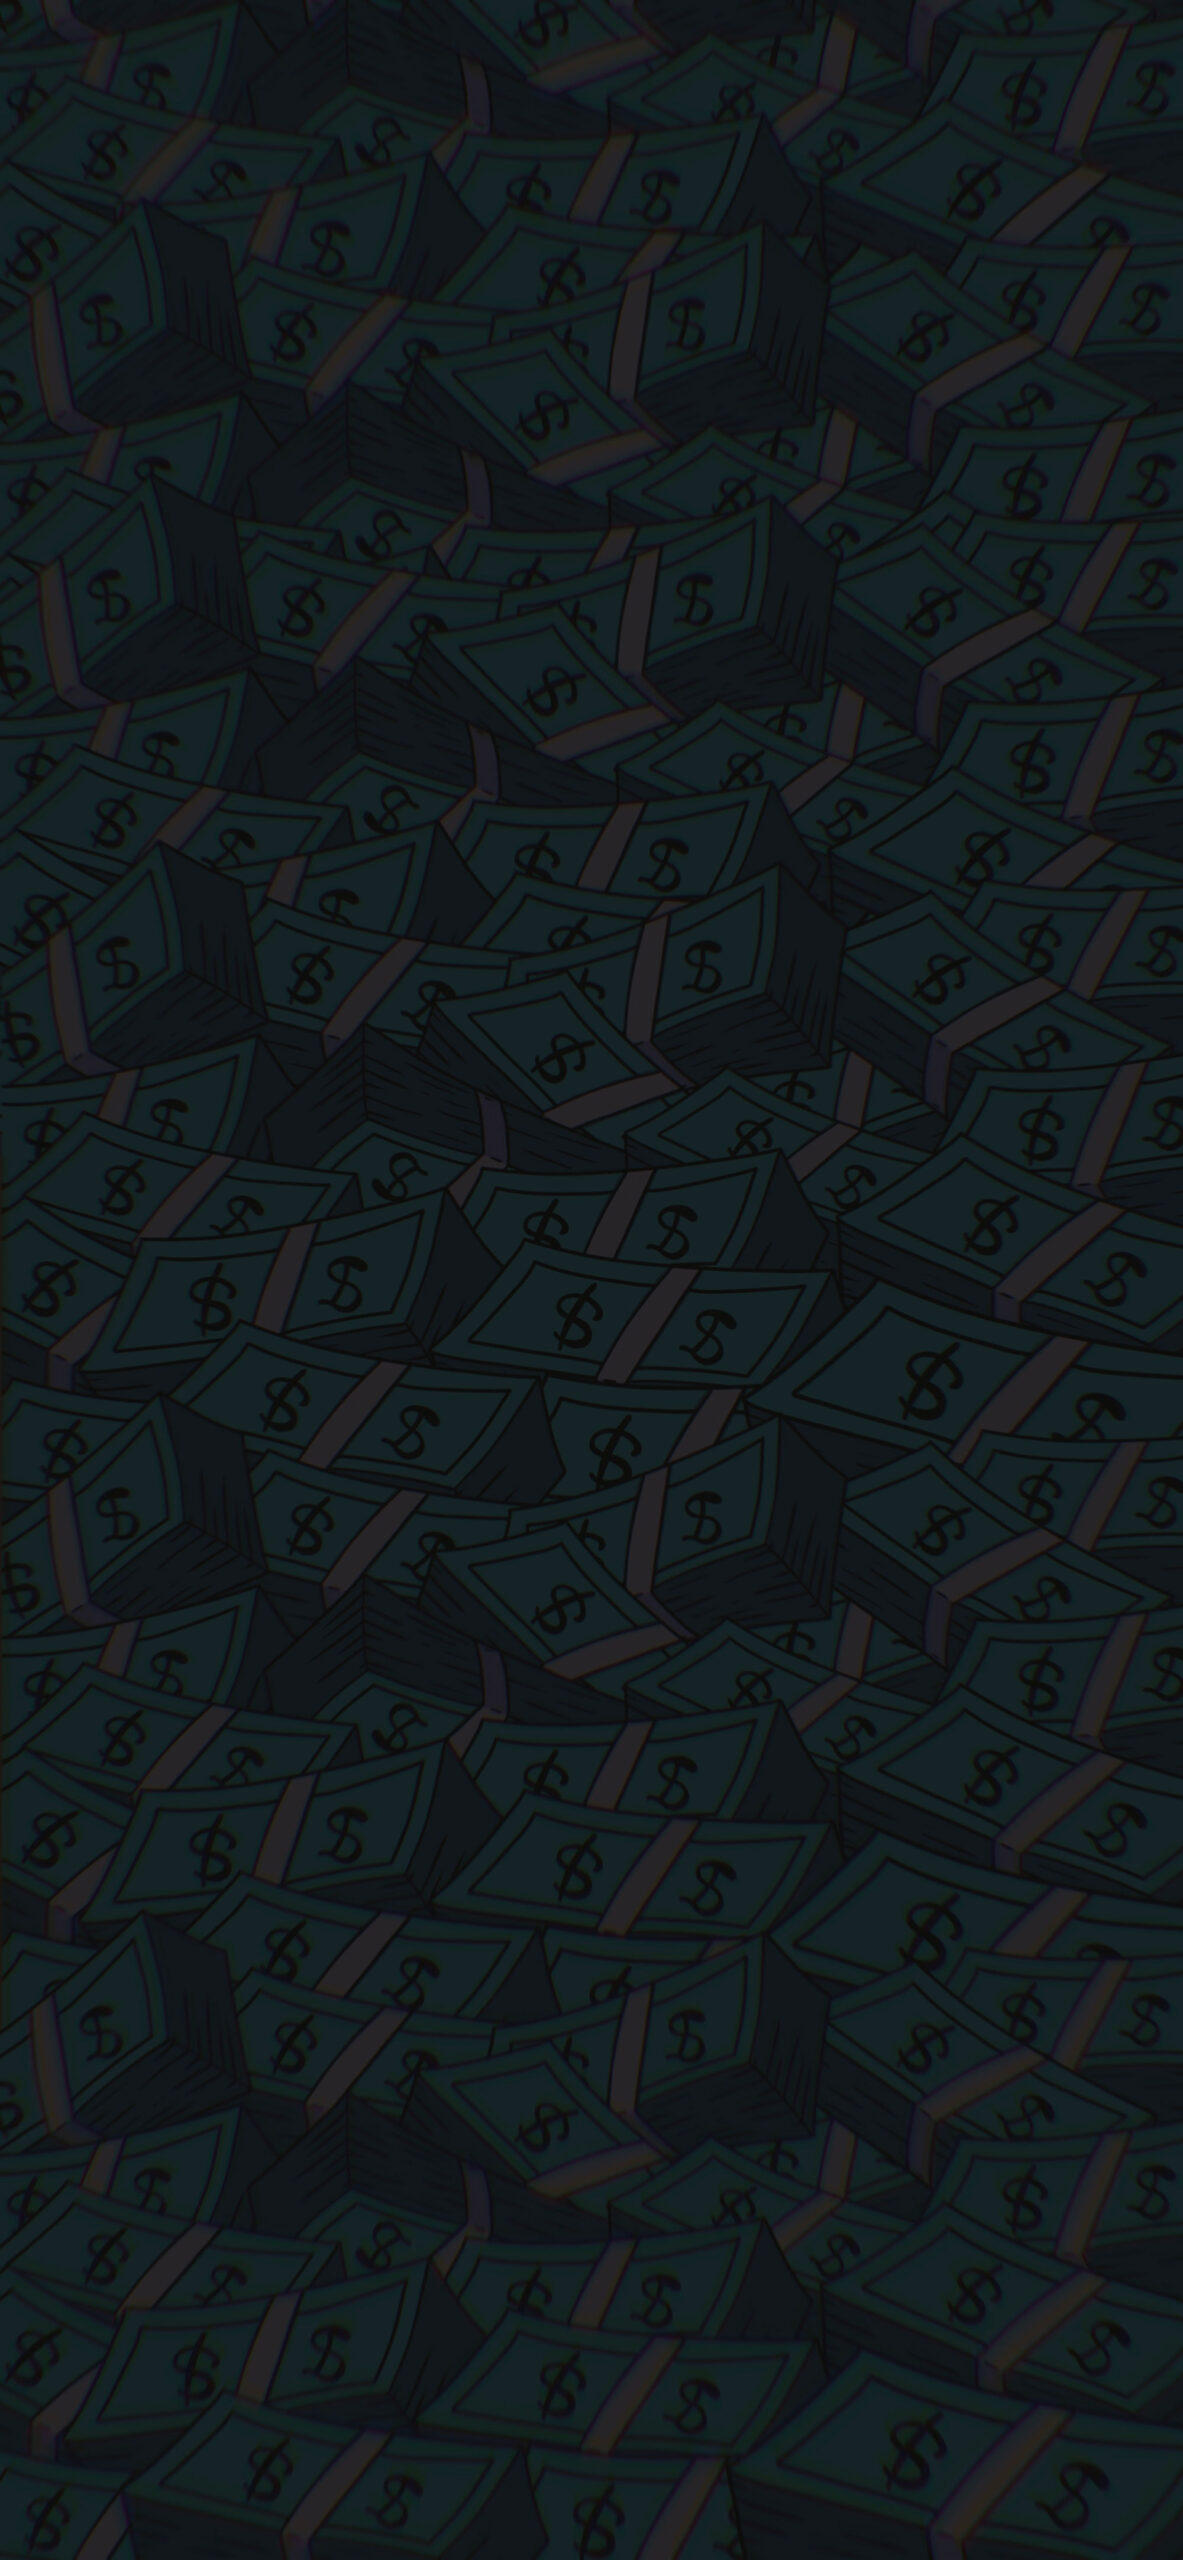 Green Money Wallpaper For iPhone Android